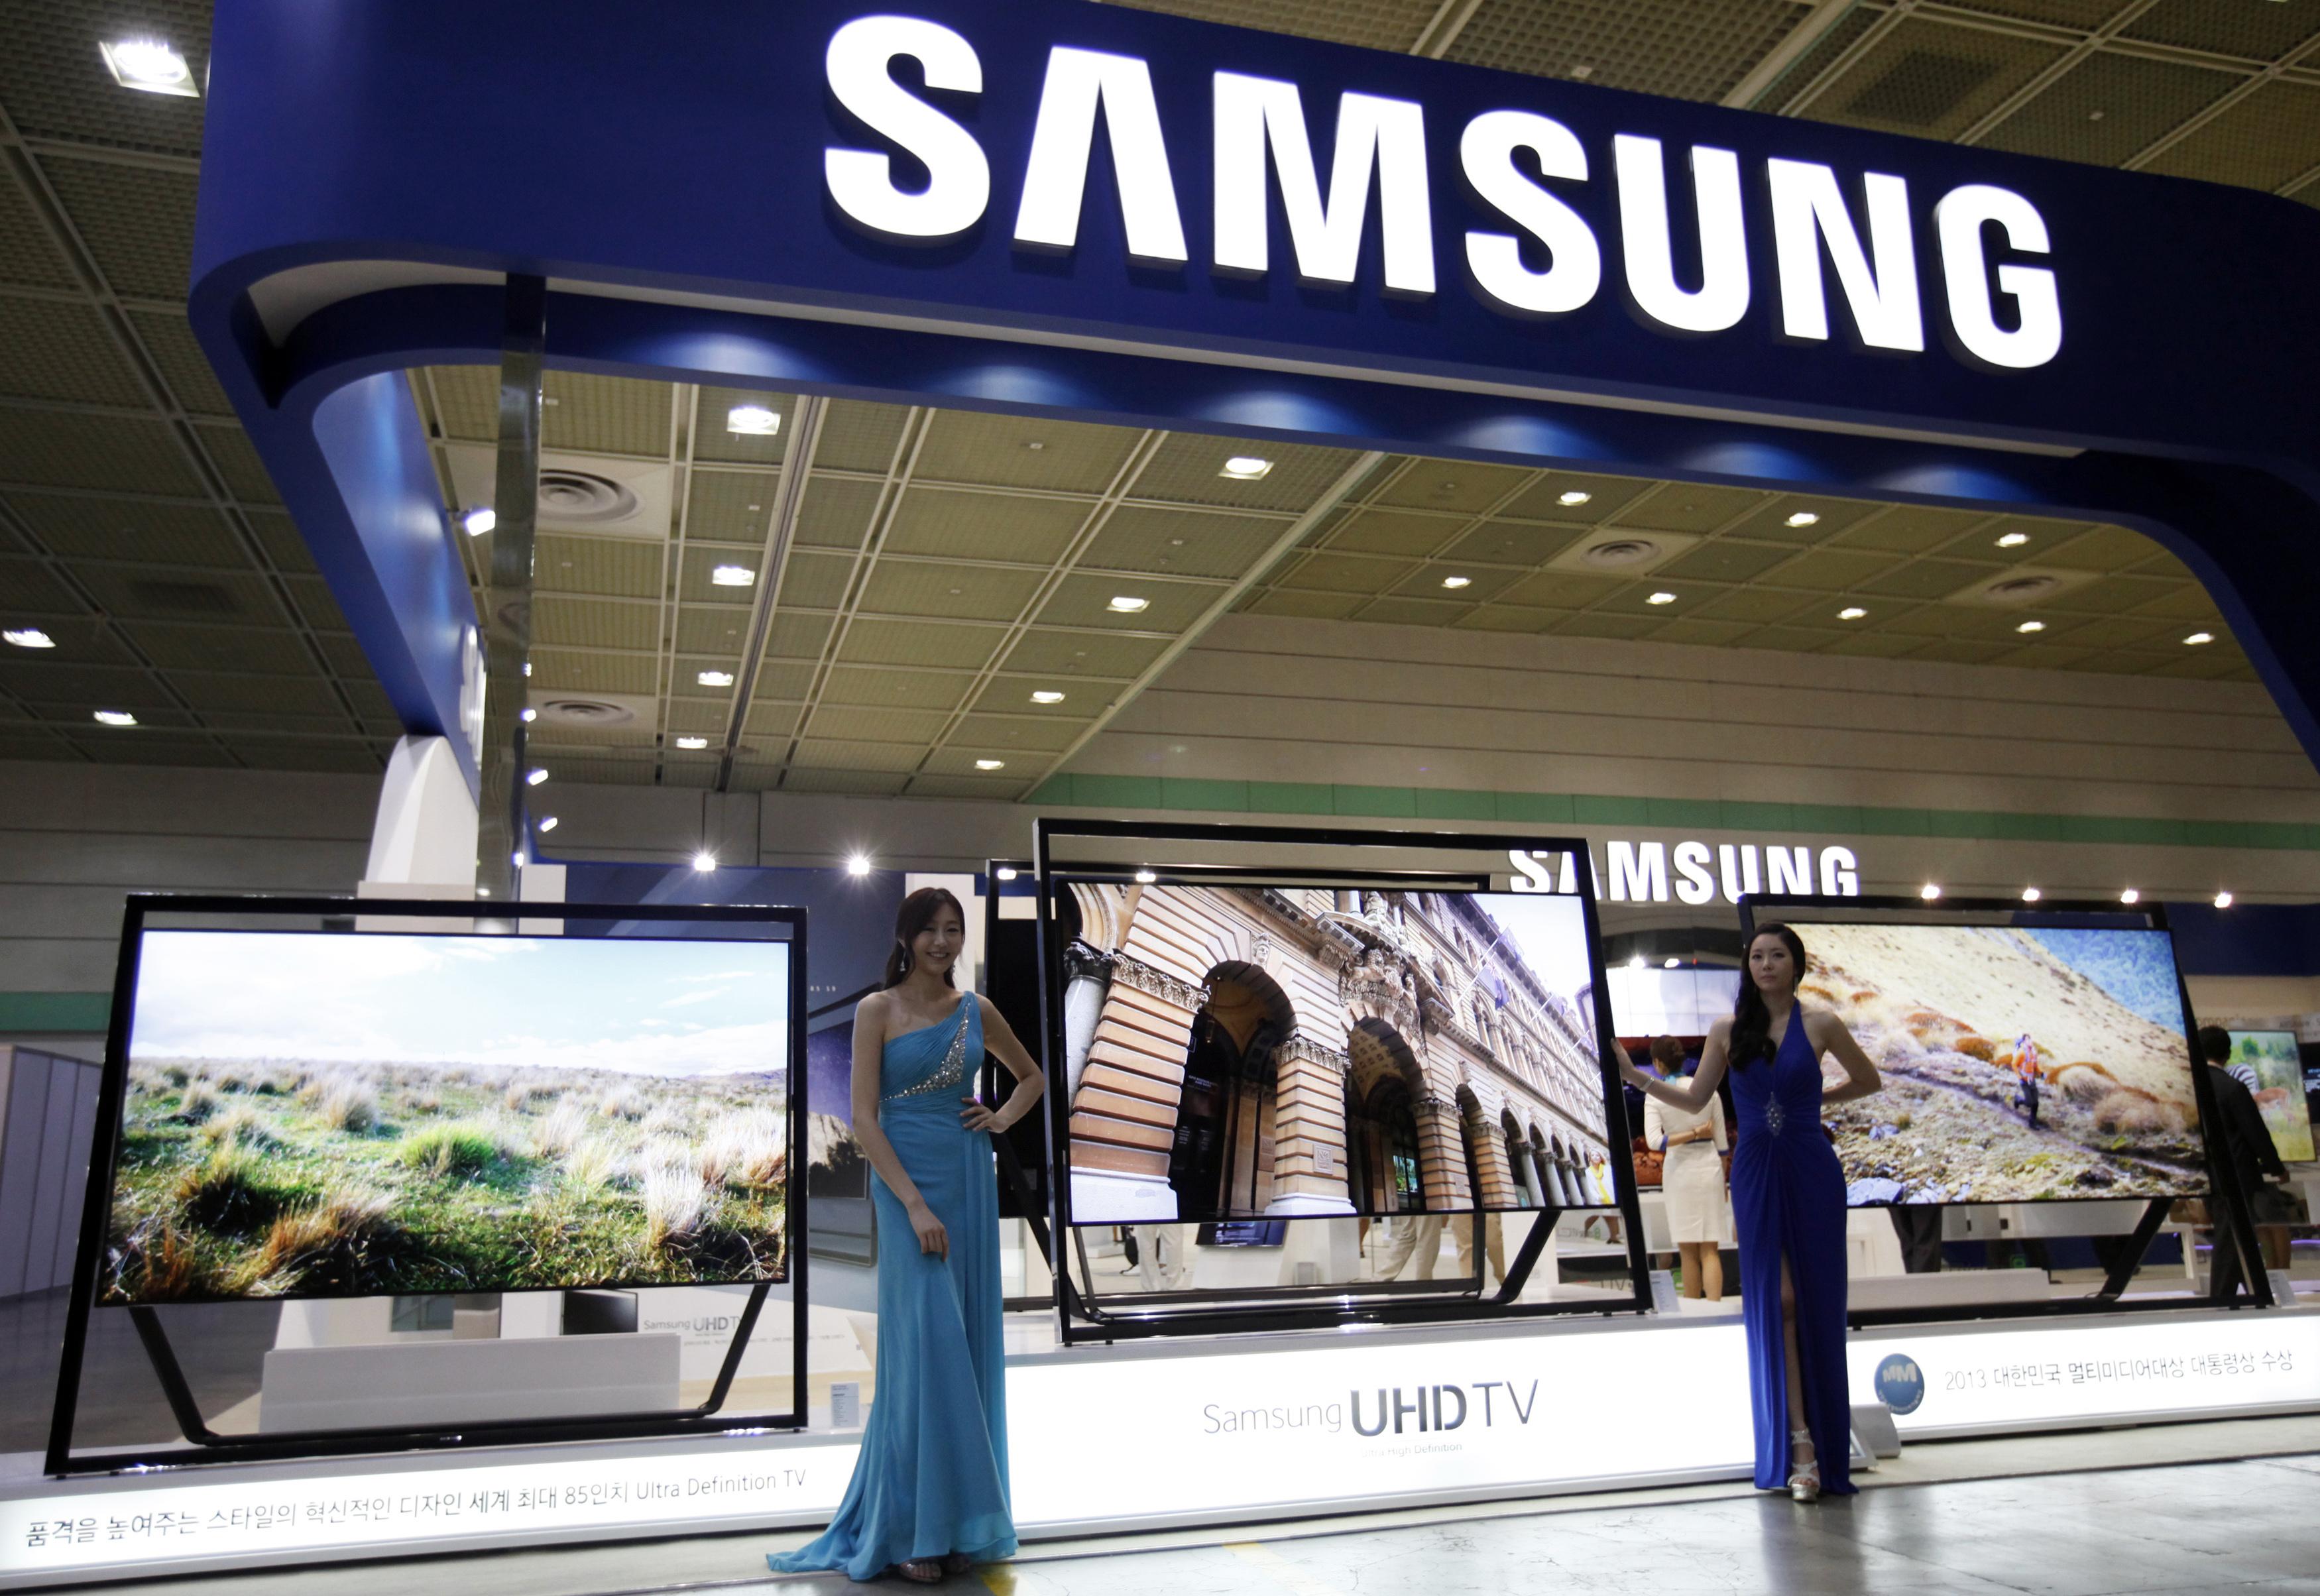 Brazil sues Samsung over poor working conditions